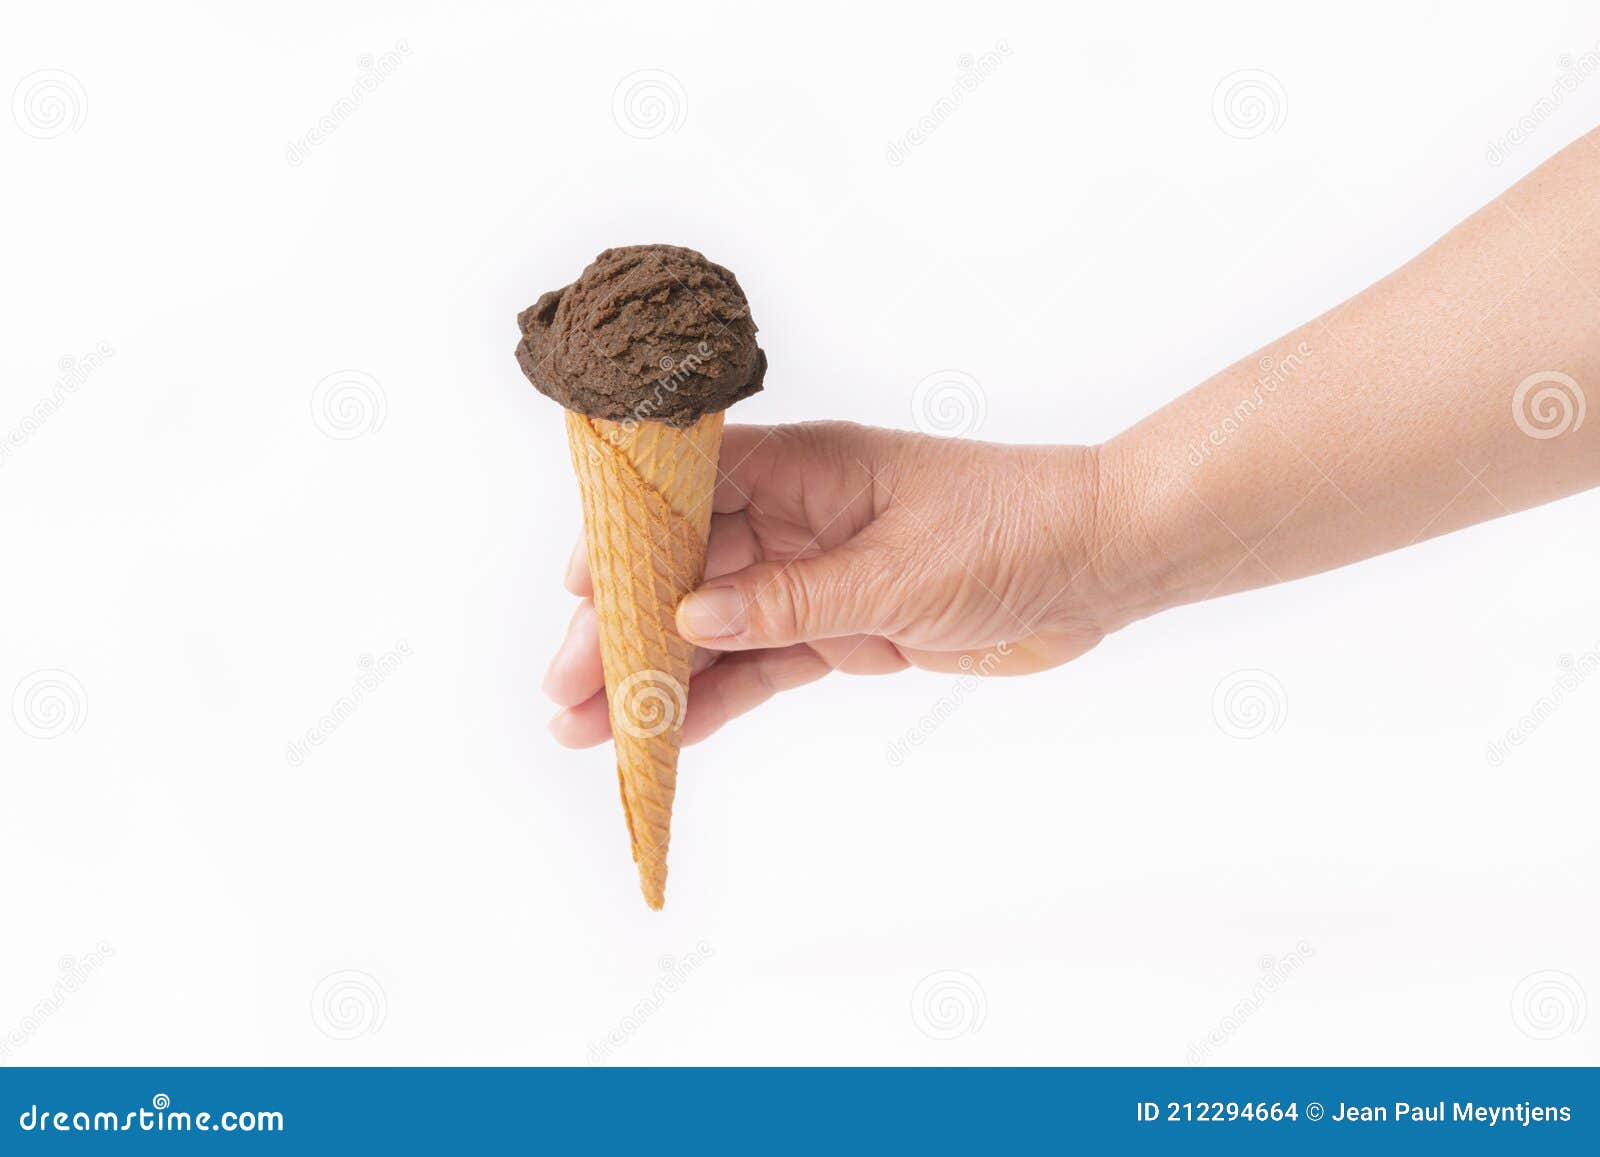 https://thumbs.dreamstime.com/z/hand-holding-chocolate-ice-cream-cone-female-tempting-wafer-scoop-light-background-close-up-lifestyle-concept-212294664.jpg